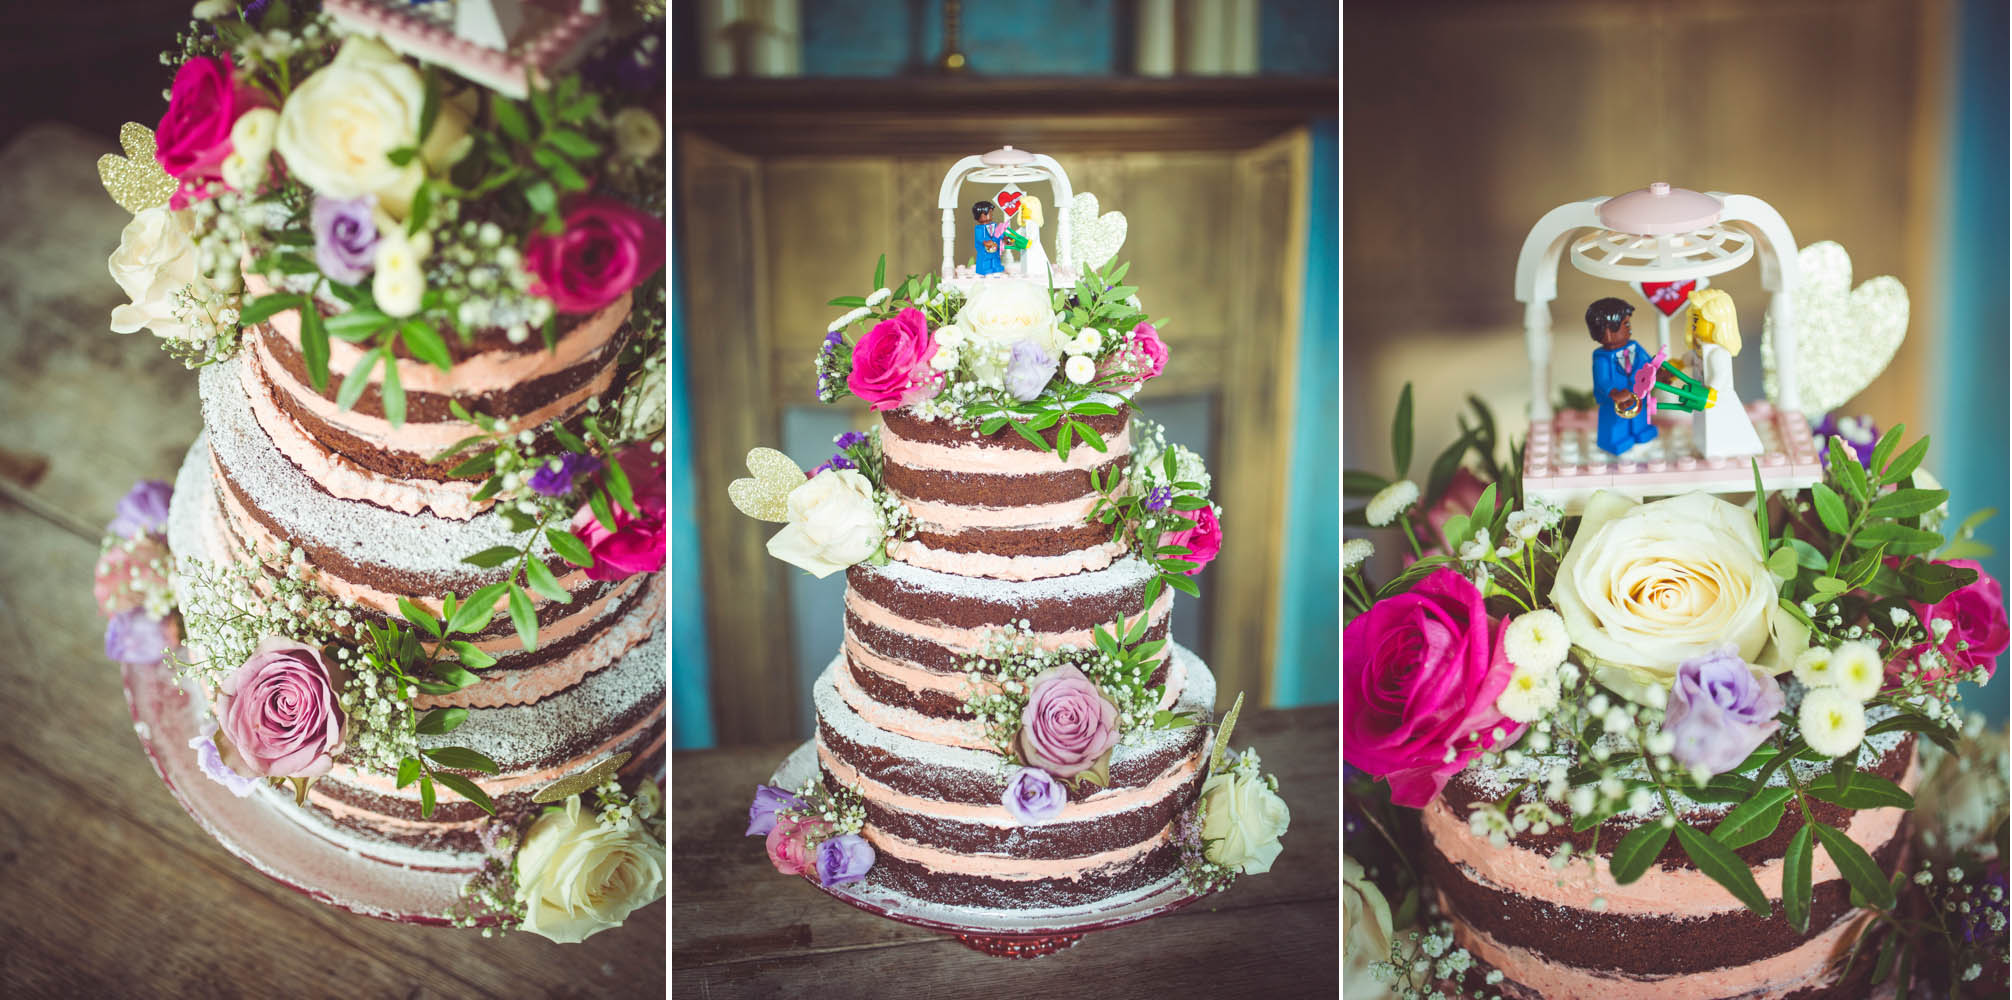 details of the wedding cake